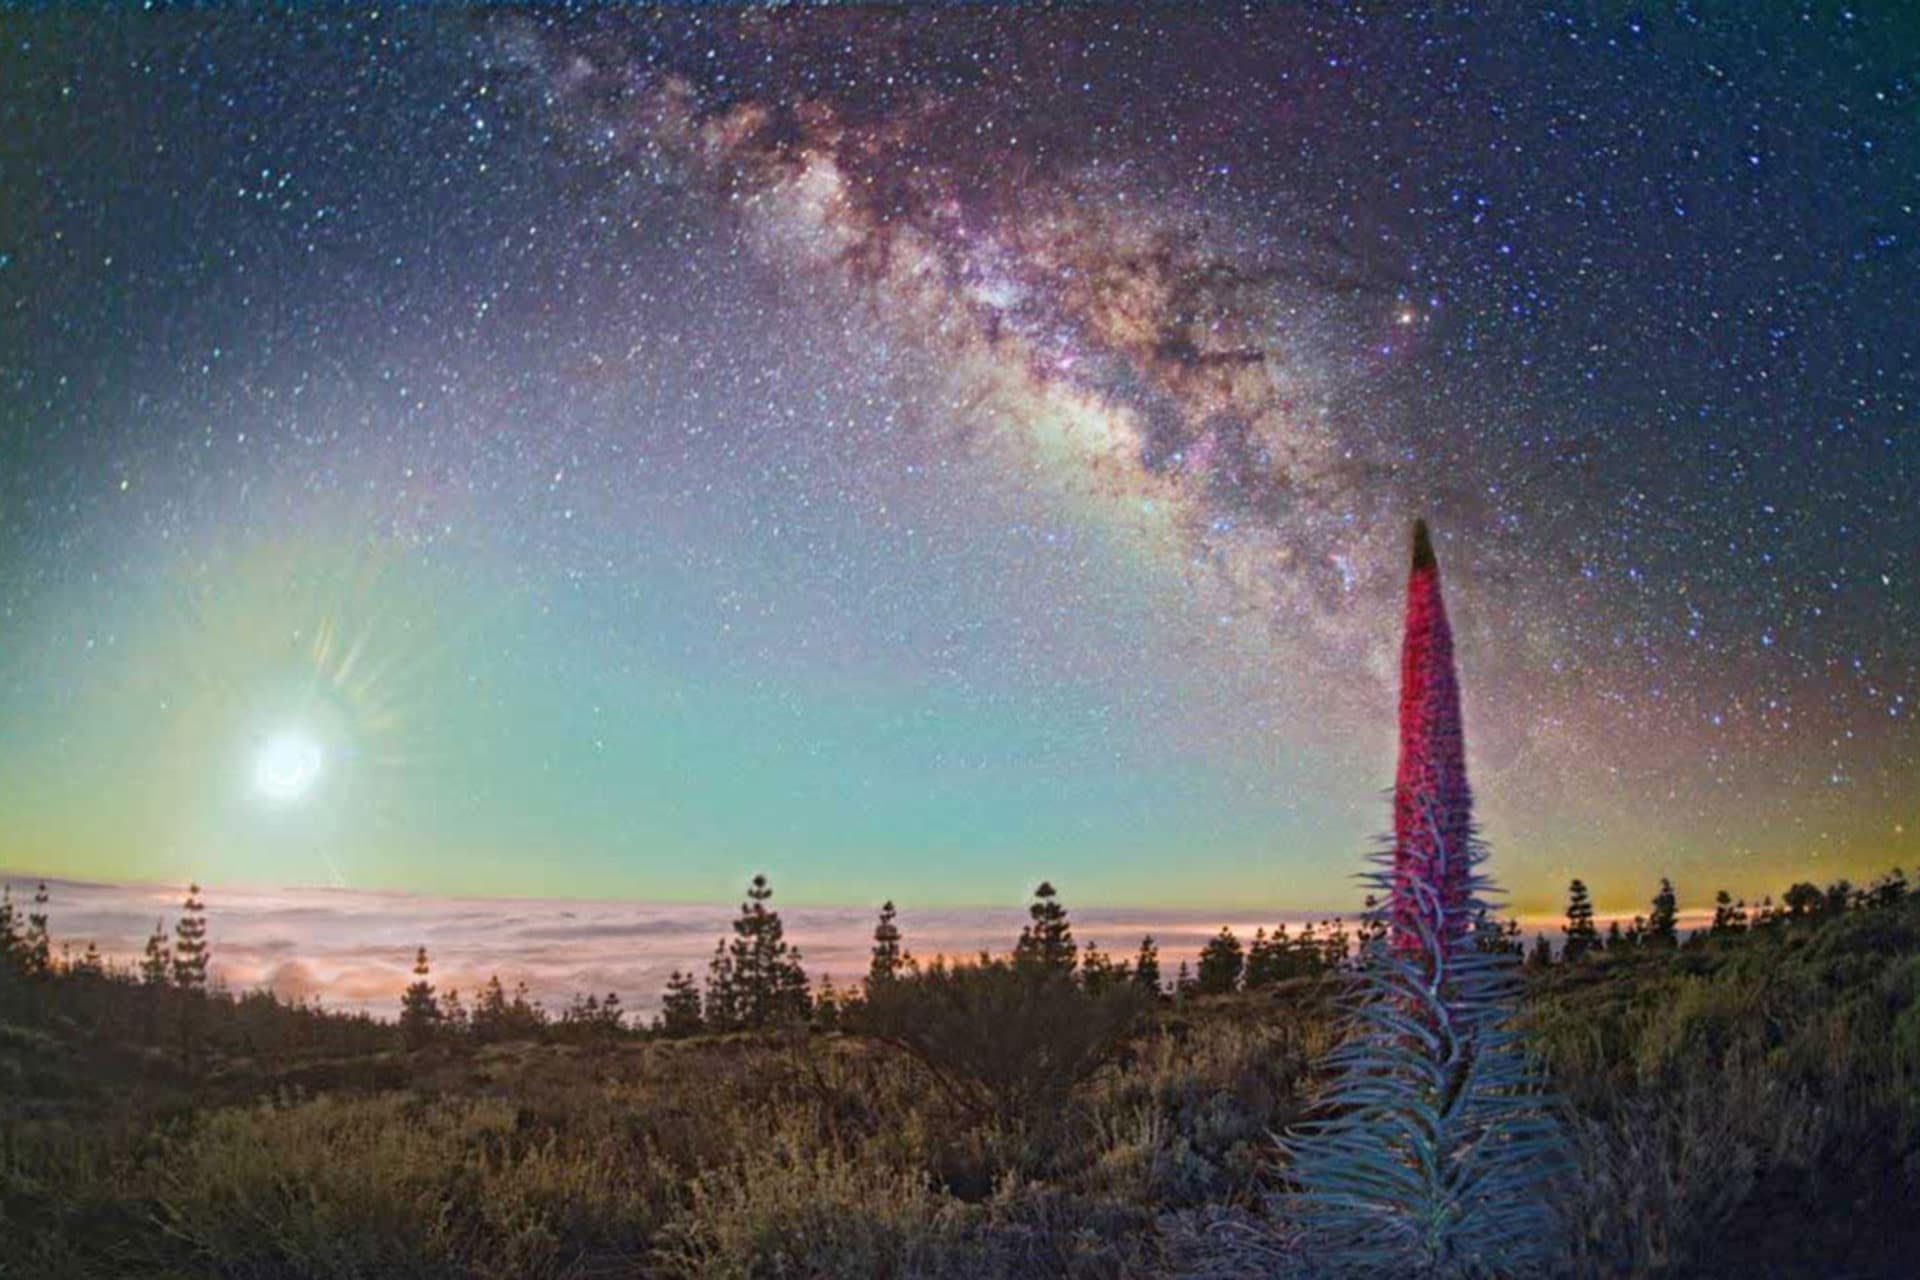 Star-gazing-in-the-National-Park-Teide-1920x1280-4